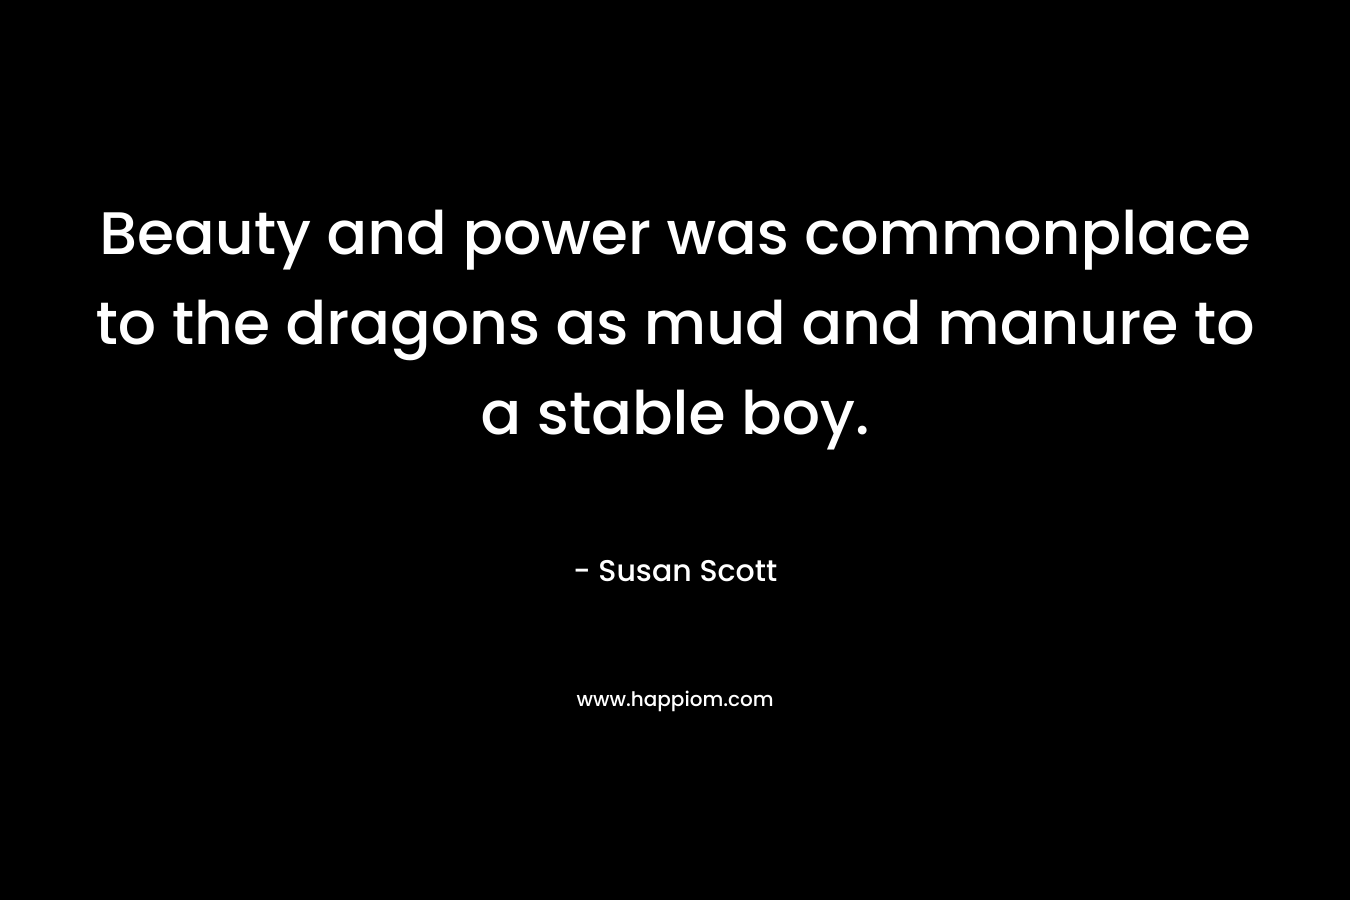 Beauty and power was commonplace to the dragons as mud and manure to a stable boy.